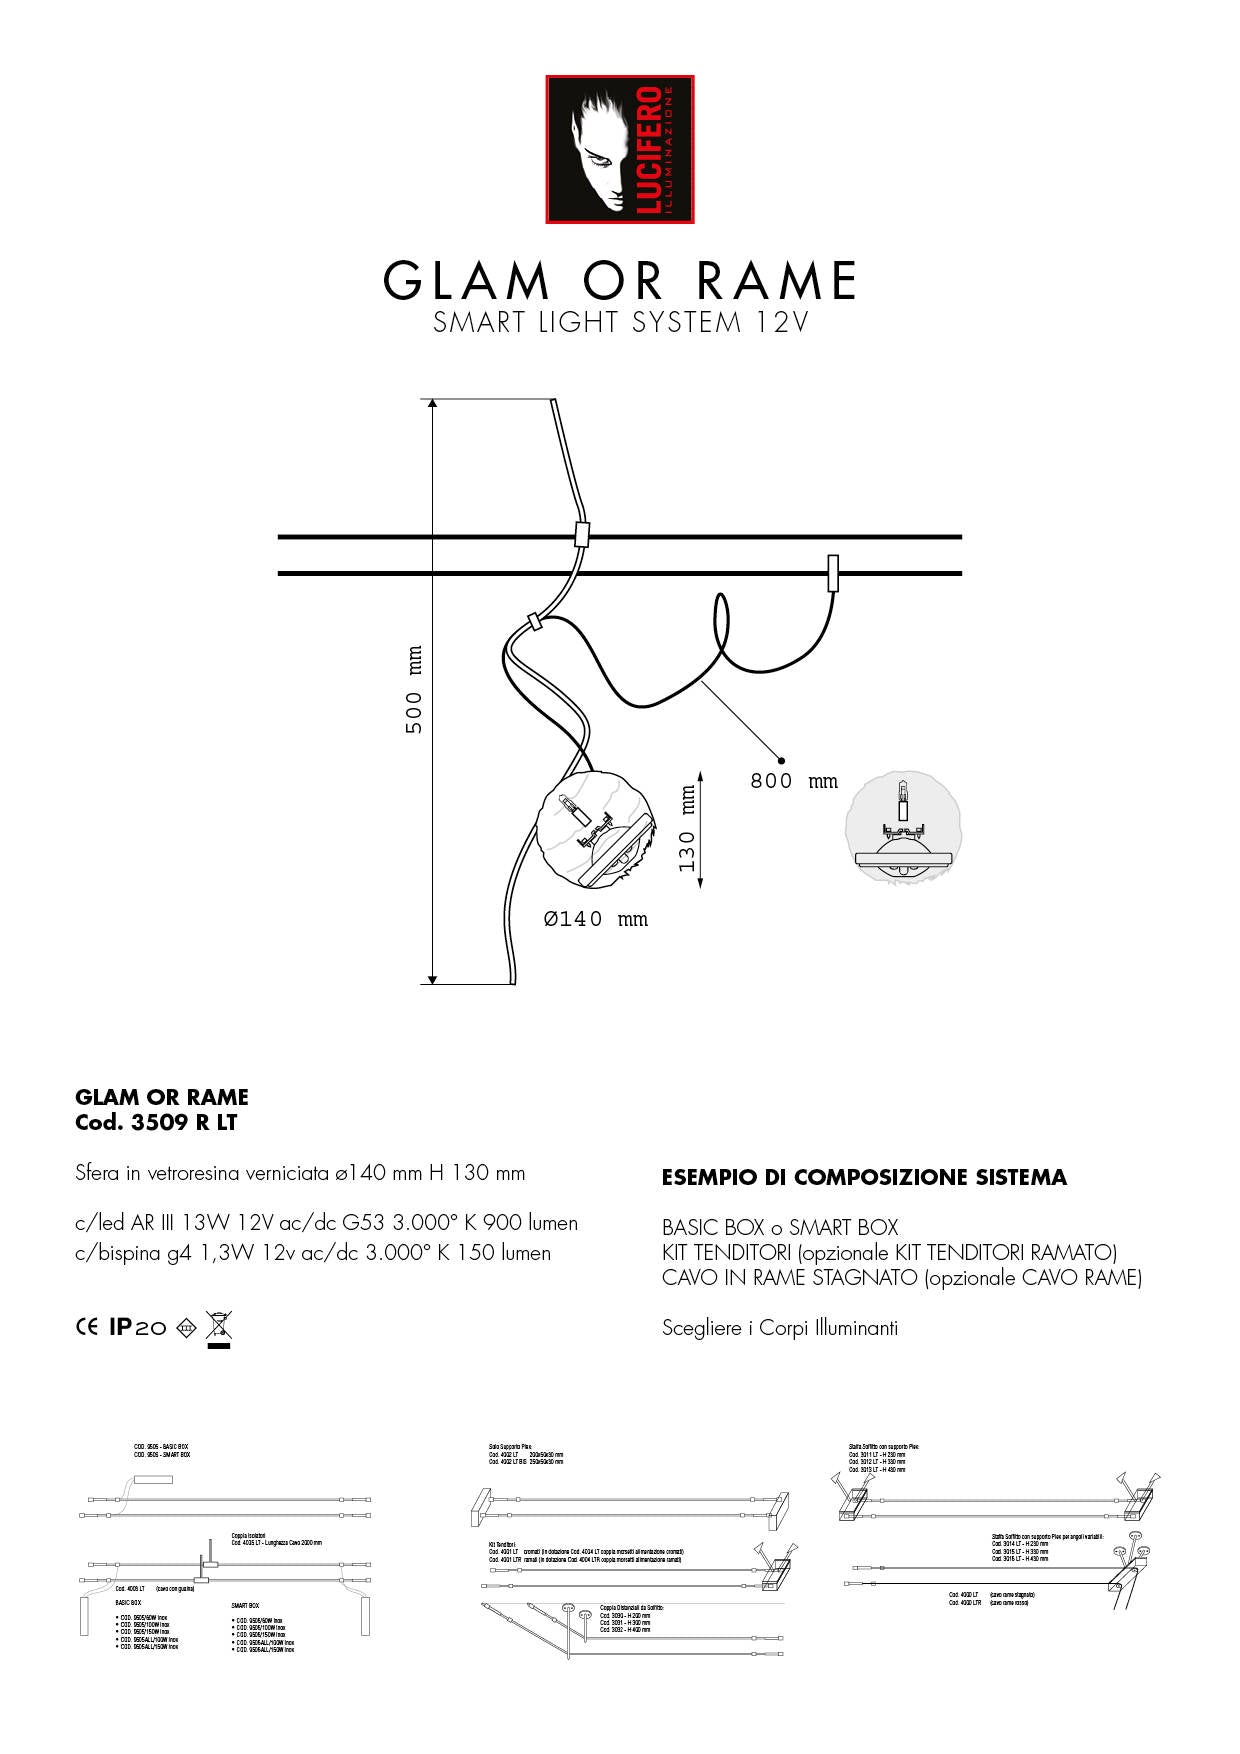 Glam or rame